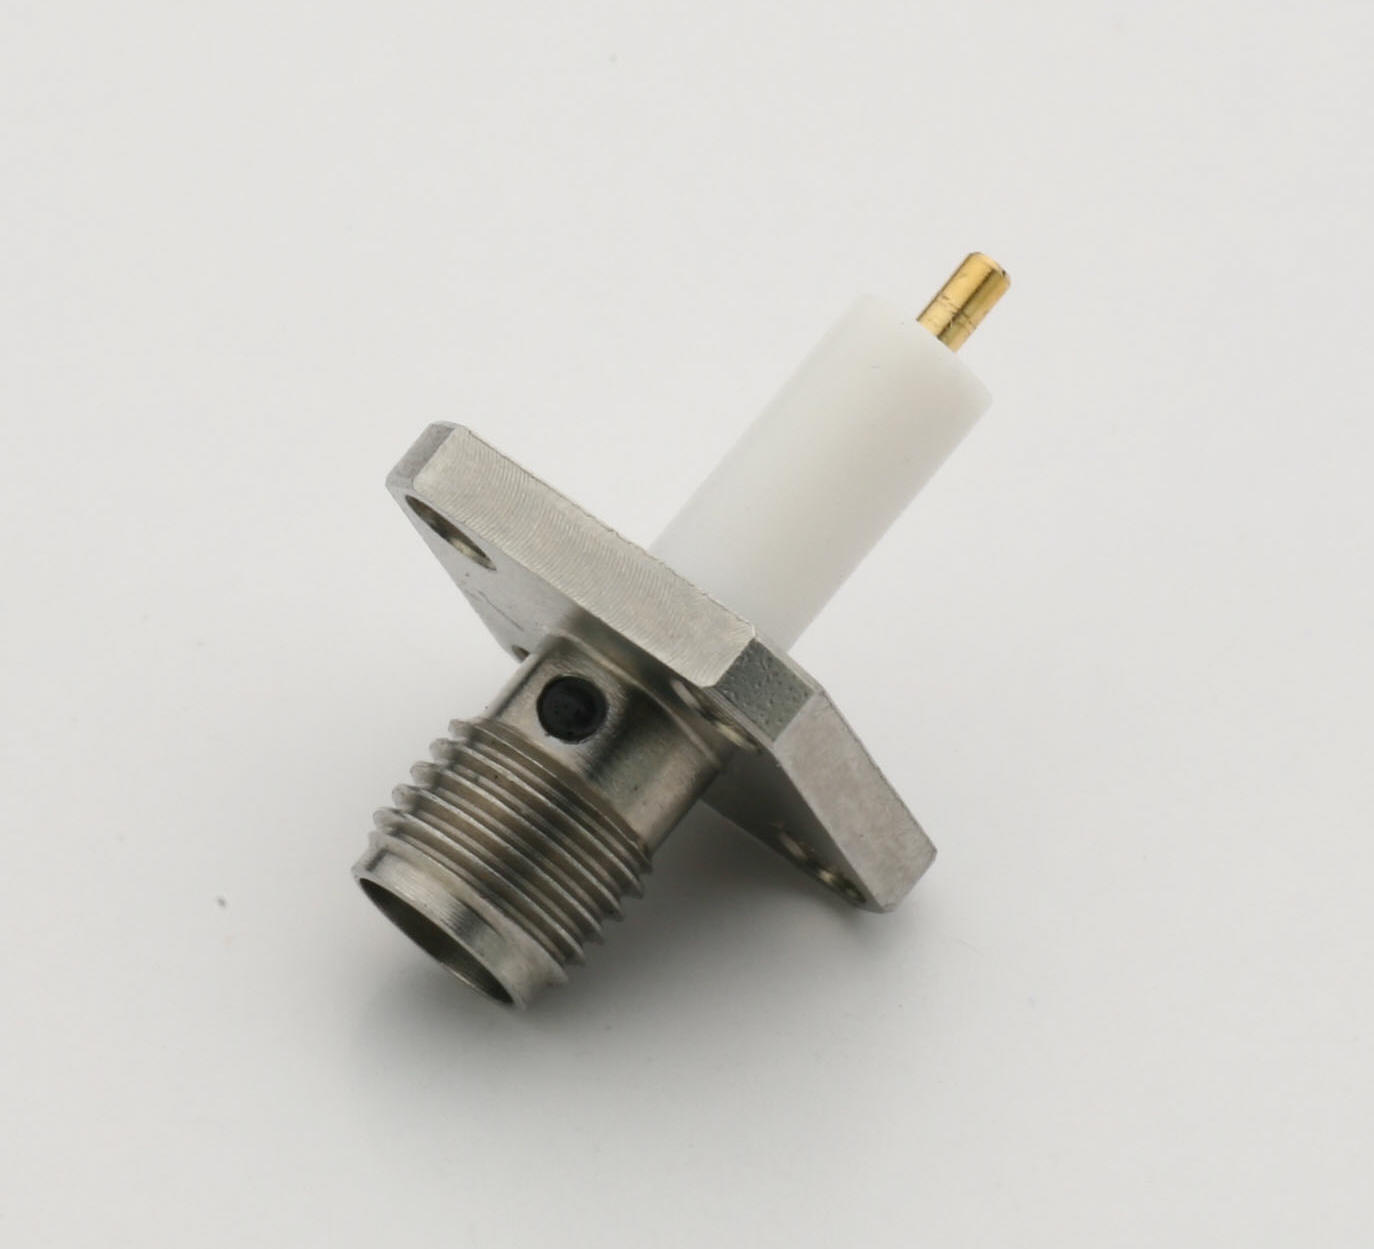 SMA Receptacle Jack for 4 Mounting Holes